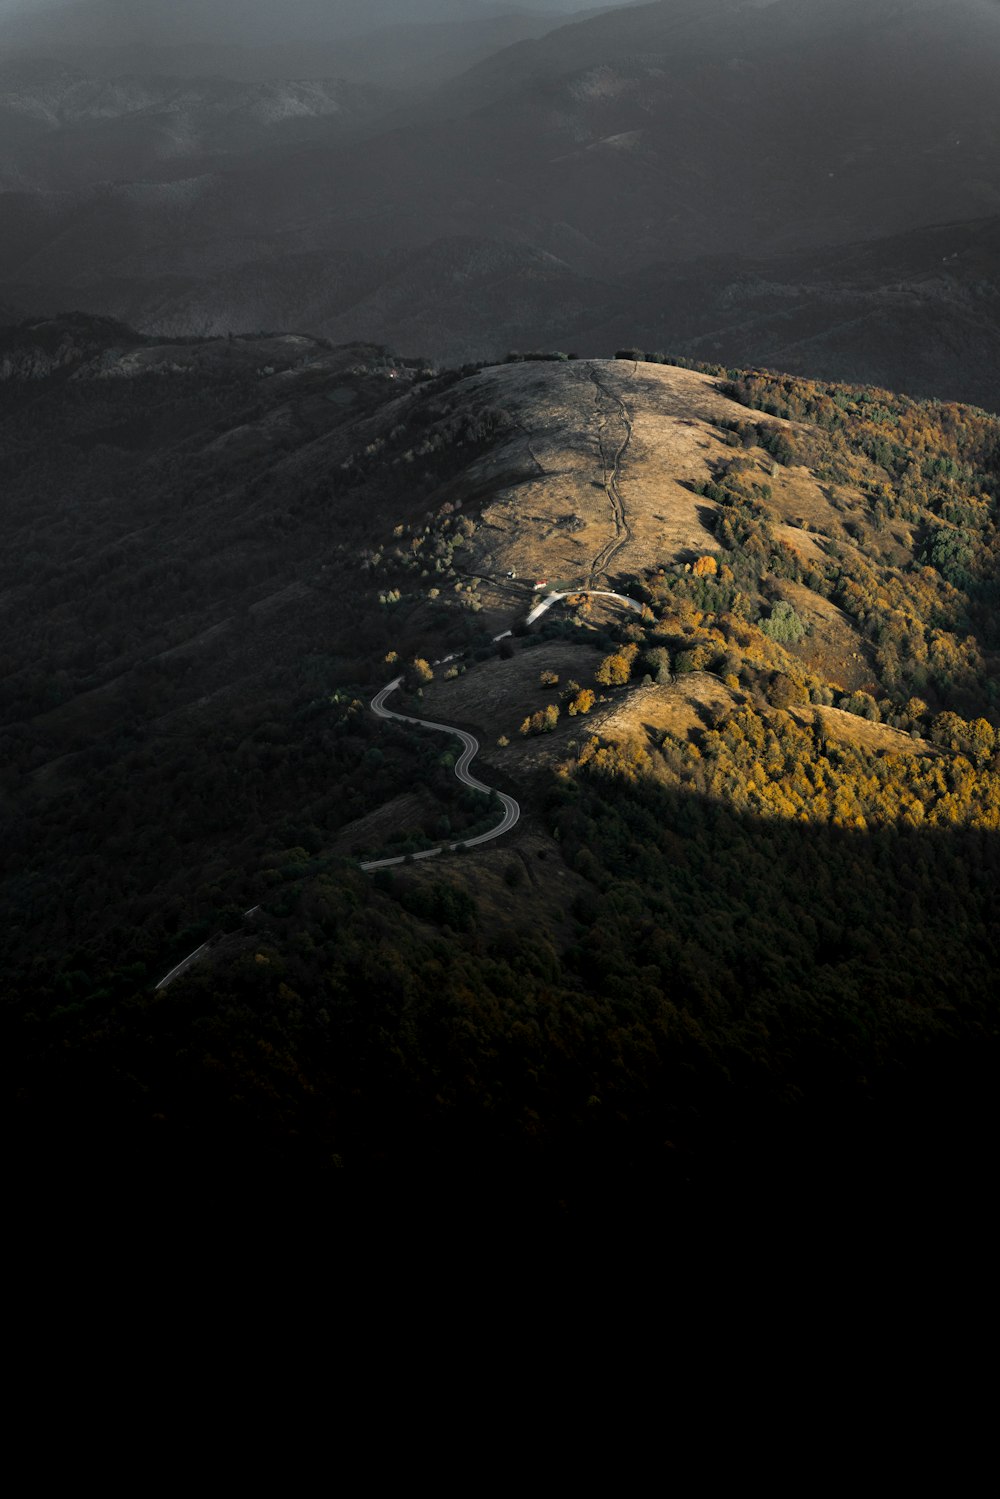 a scenic view of a winding road in the mountains